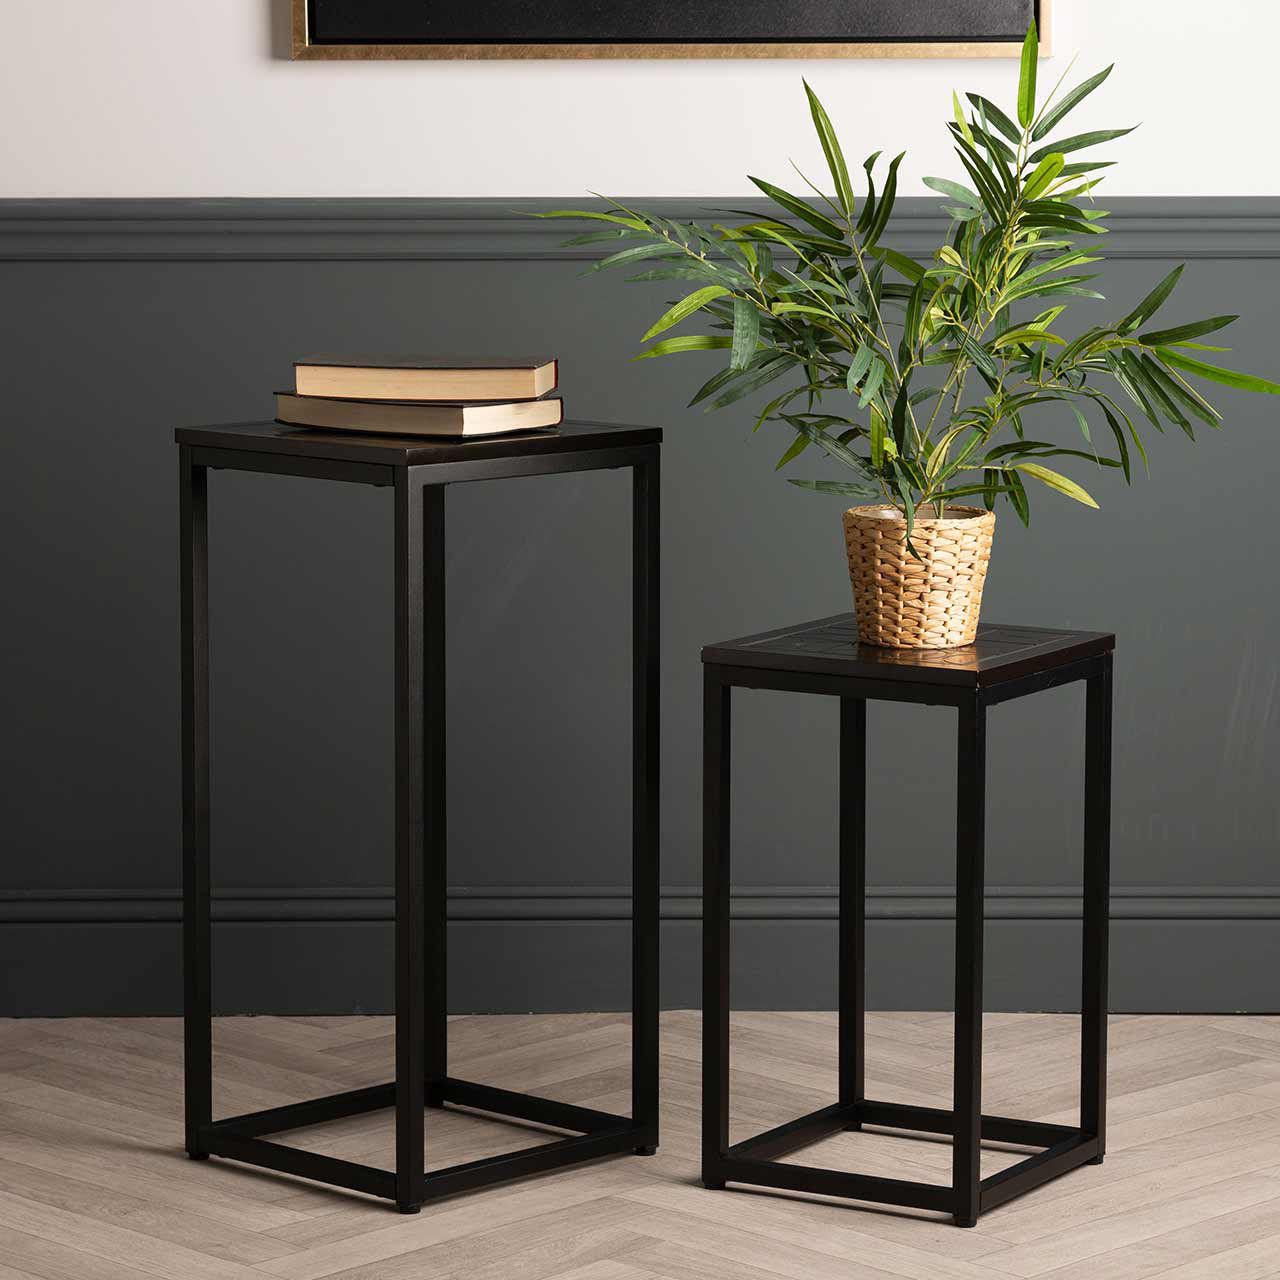 Plant Stands With Side Table With Regard To 2020 Brayden Studio 2 Piece Nest Of Tables For Living Room Furniture, Metal Plant  Stand, Sofa Side Table With Wooden Top (View 11 of 15)